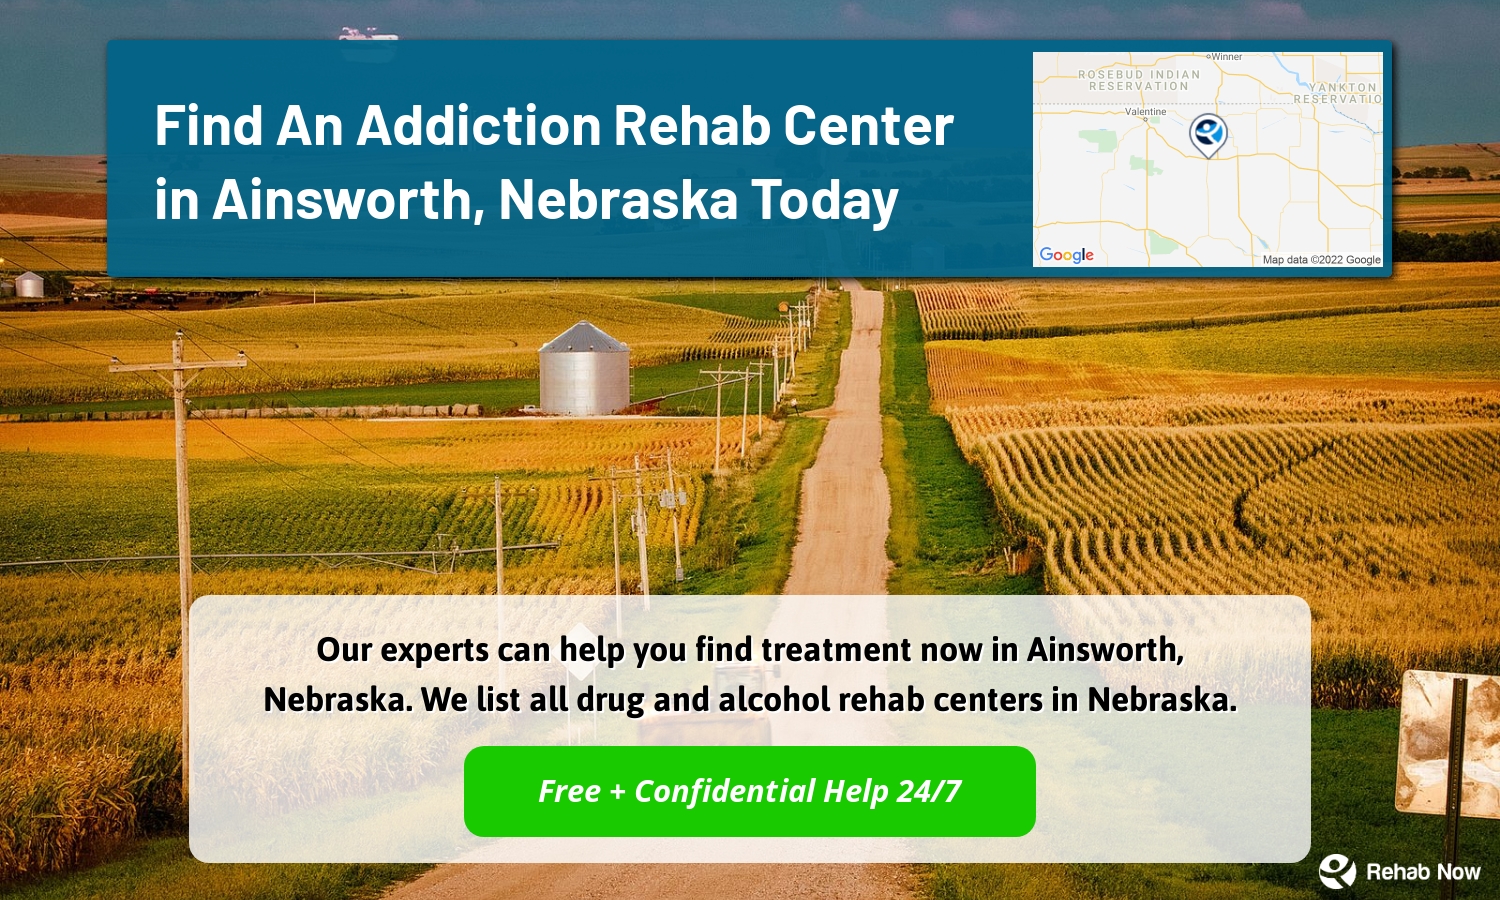 Our experts can help you find treatment now in Ainsworth, Nebraska. We list all drug and alcohol rehab centers in Nebraska.